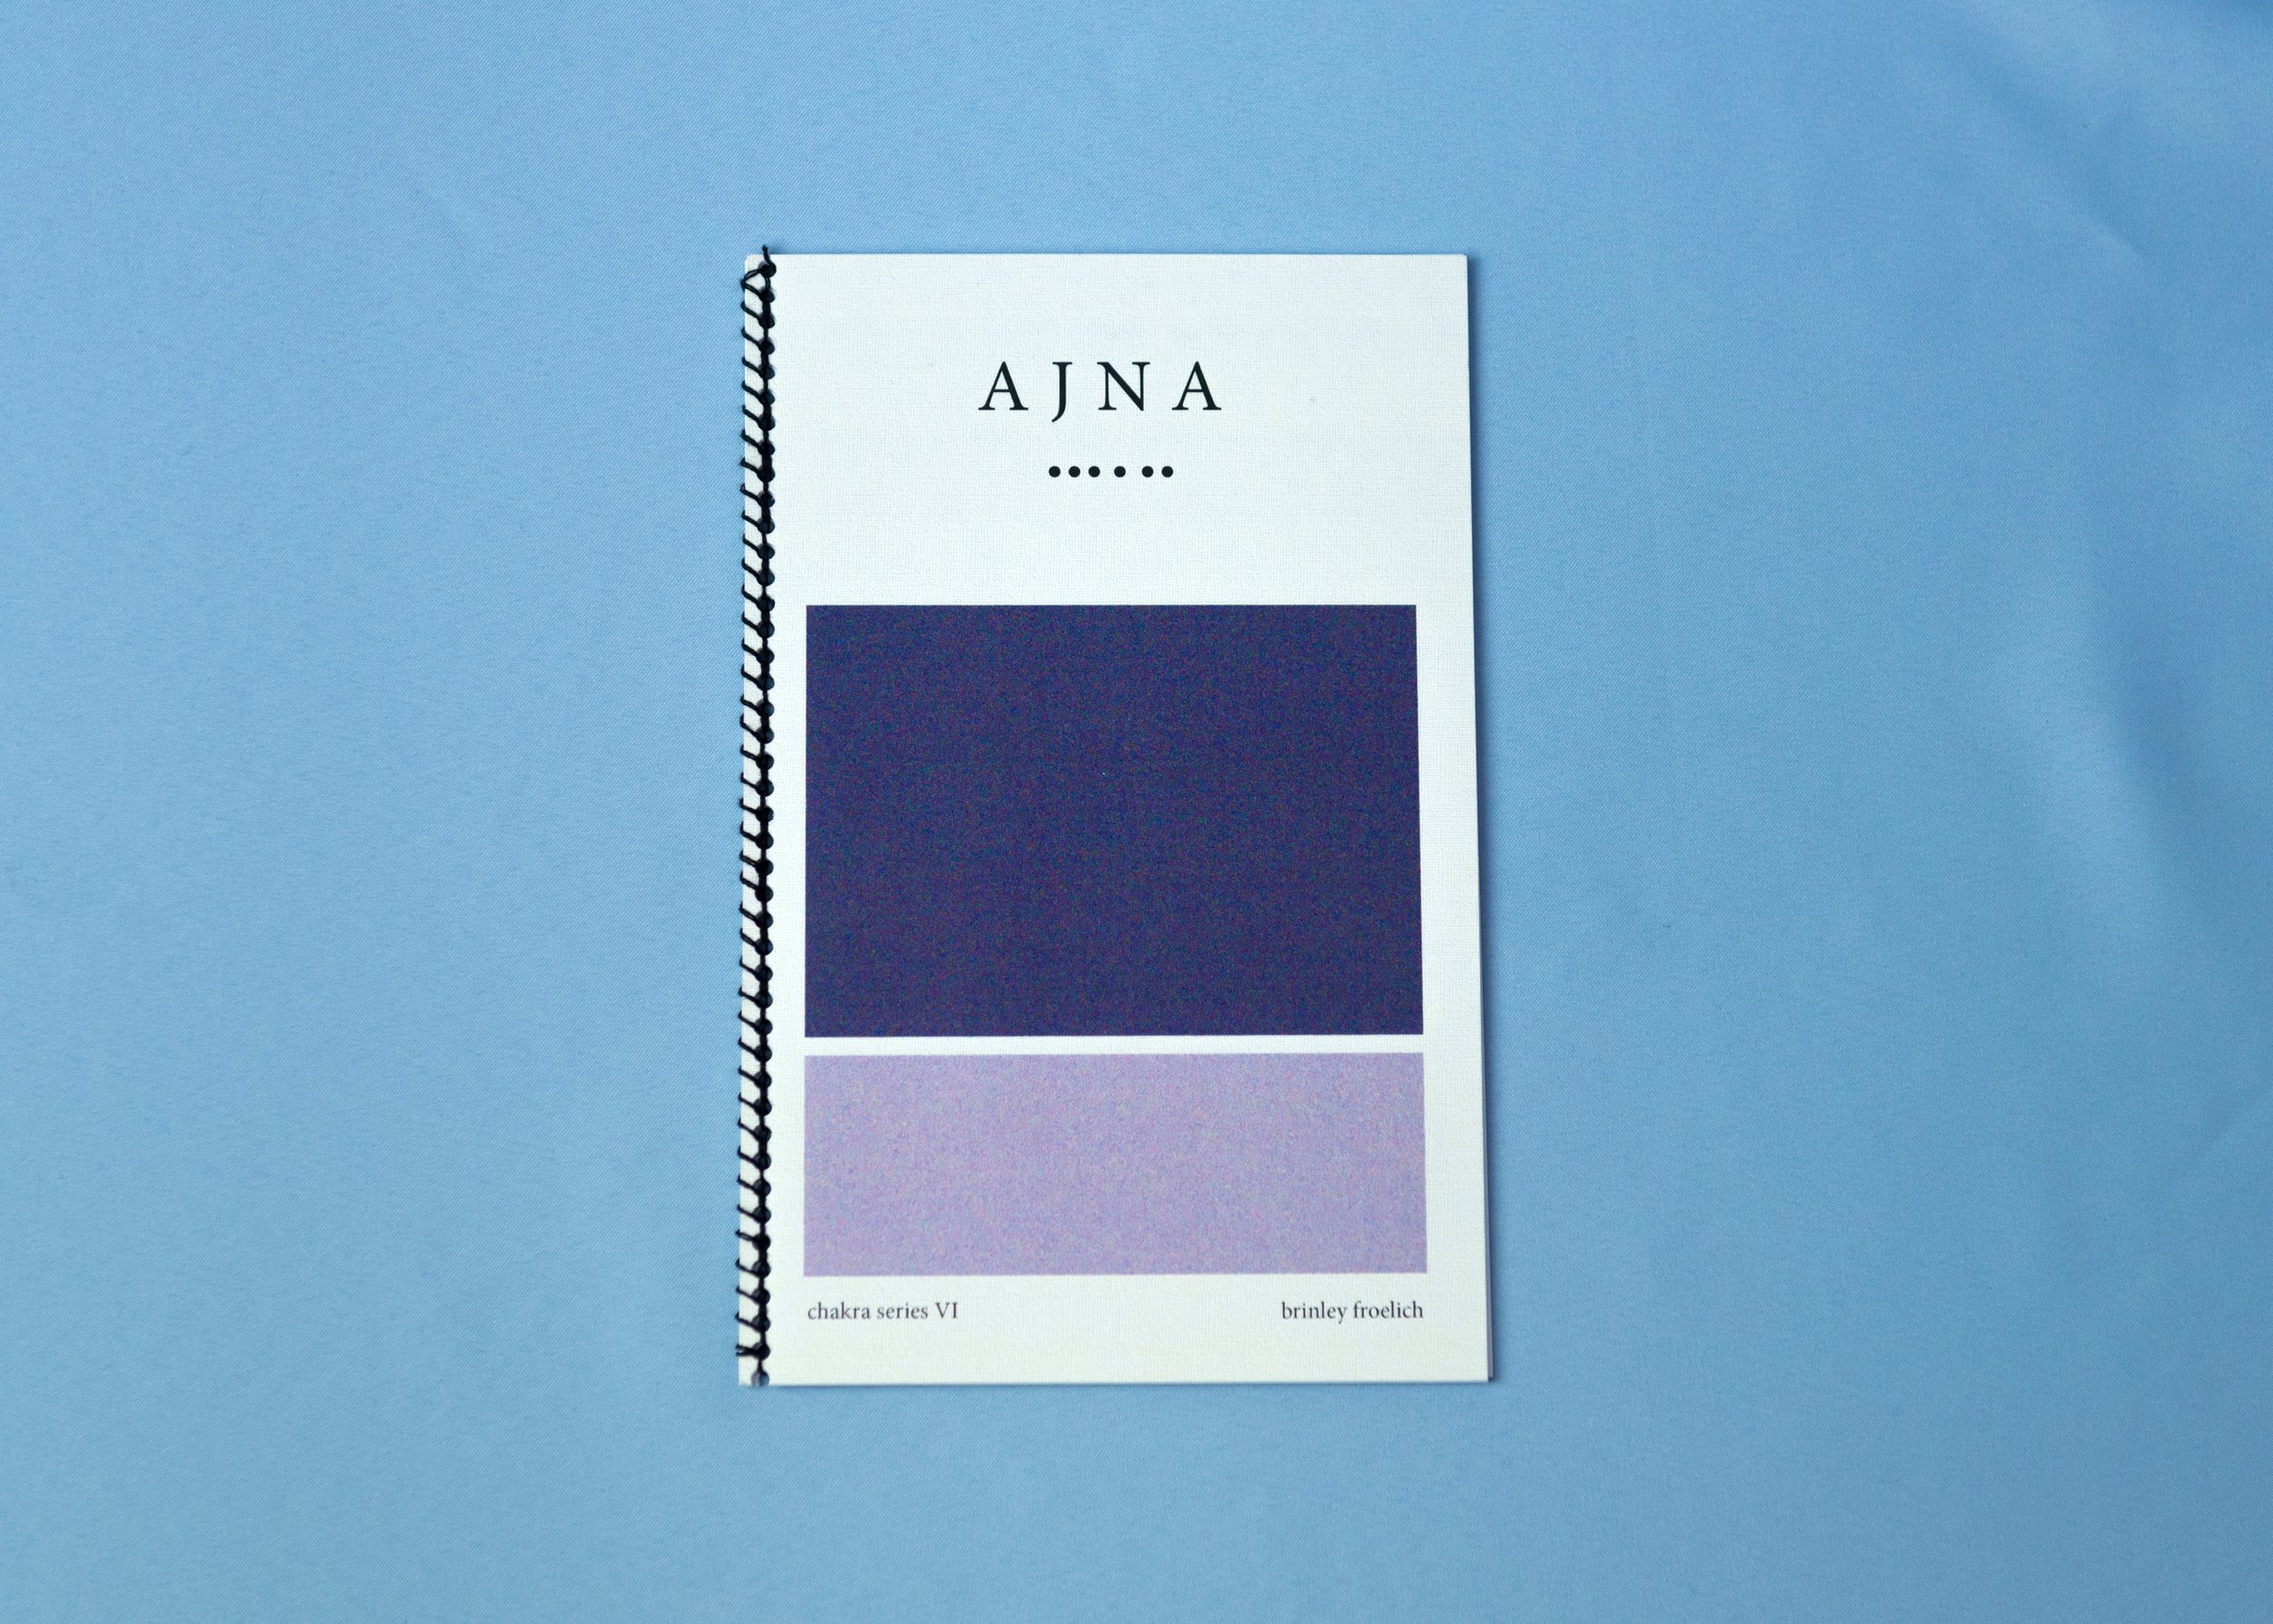 ajna zine: front cover